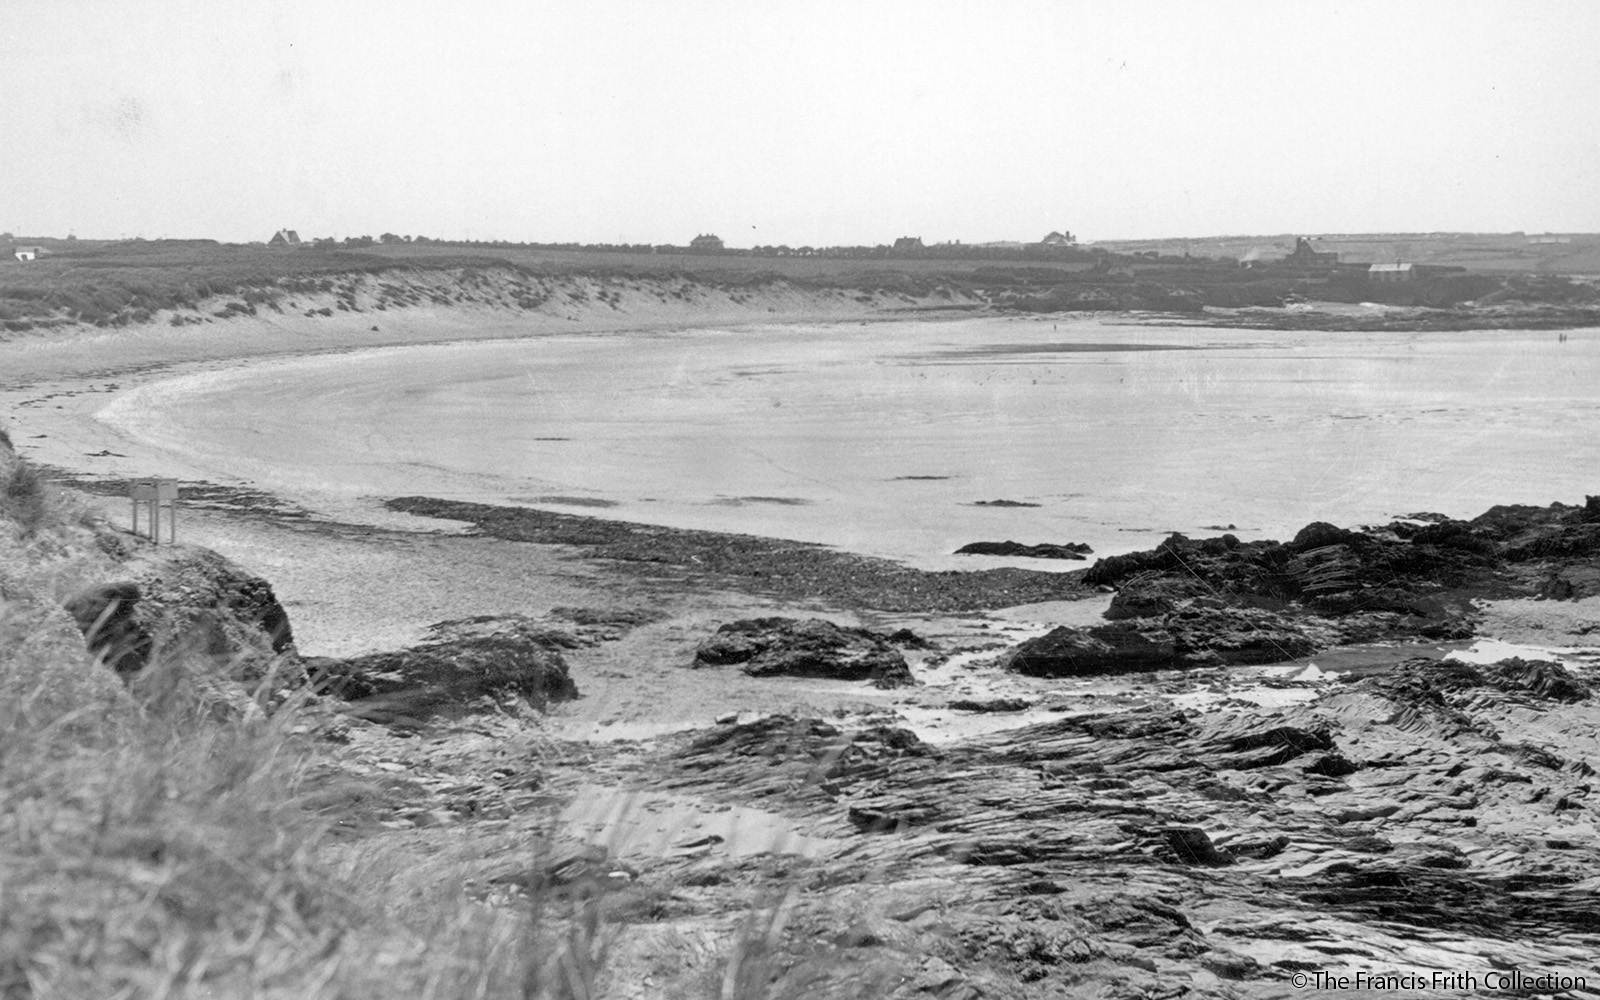 Constantine Bay from Booby Bay, c1955. Image courtesy of Francis Frith collection.